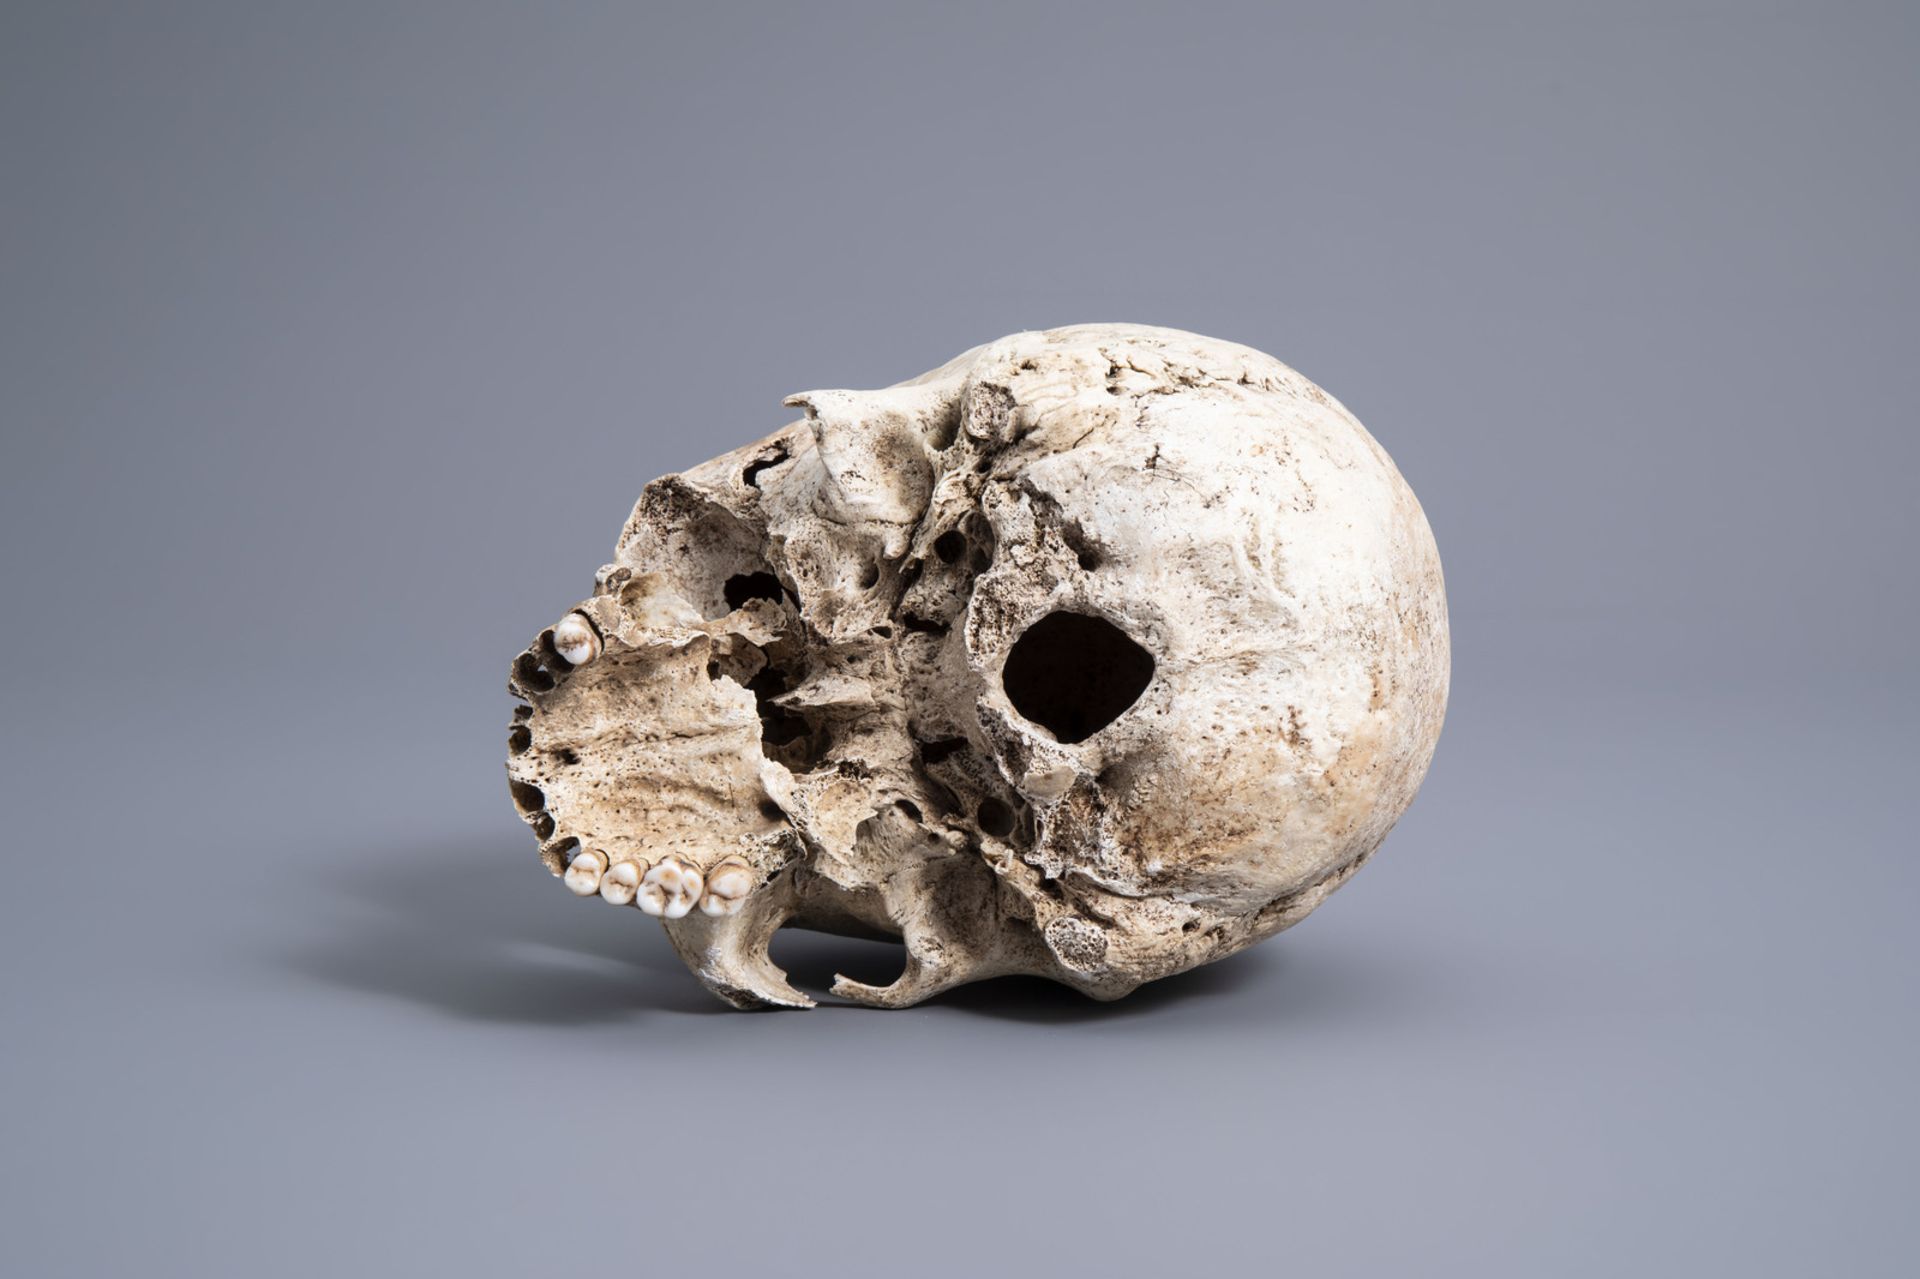 A human skull from an excavated archeological context, 17th/18th C. - Image 5 of 6